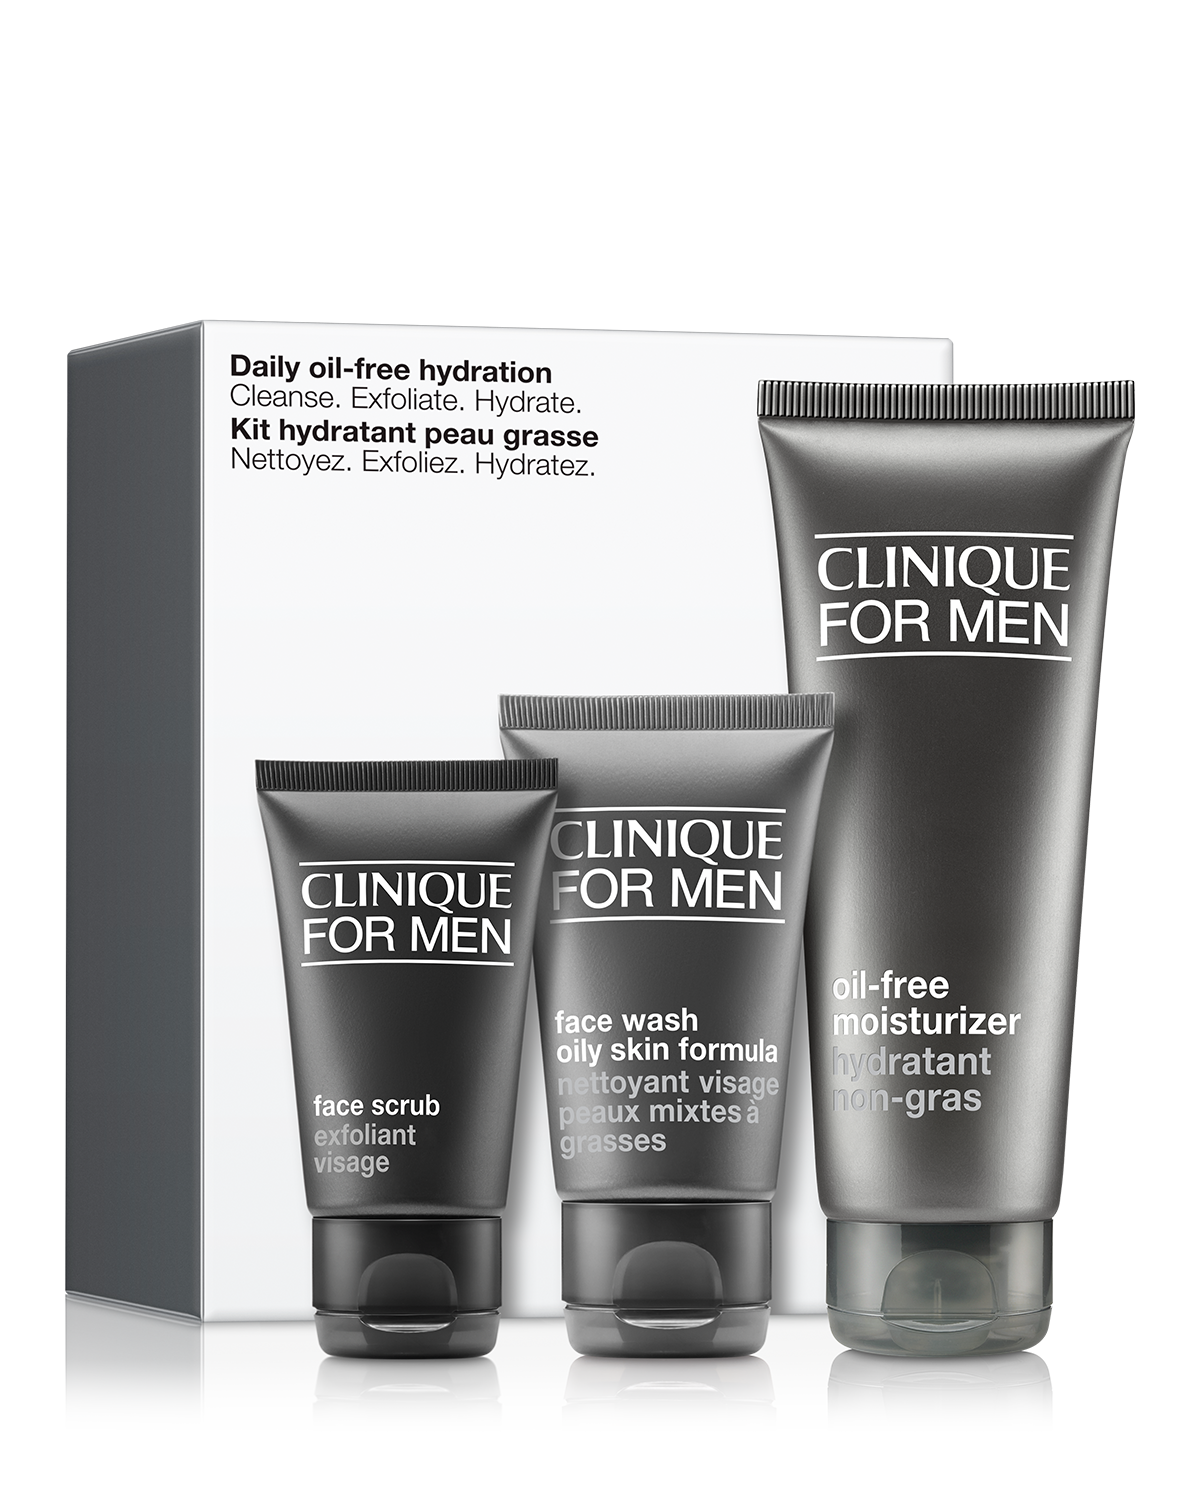 Daily Oil-Free Hydration Skincare Gift Set for Men 